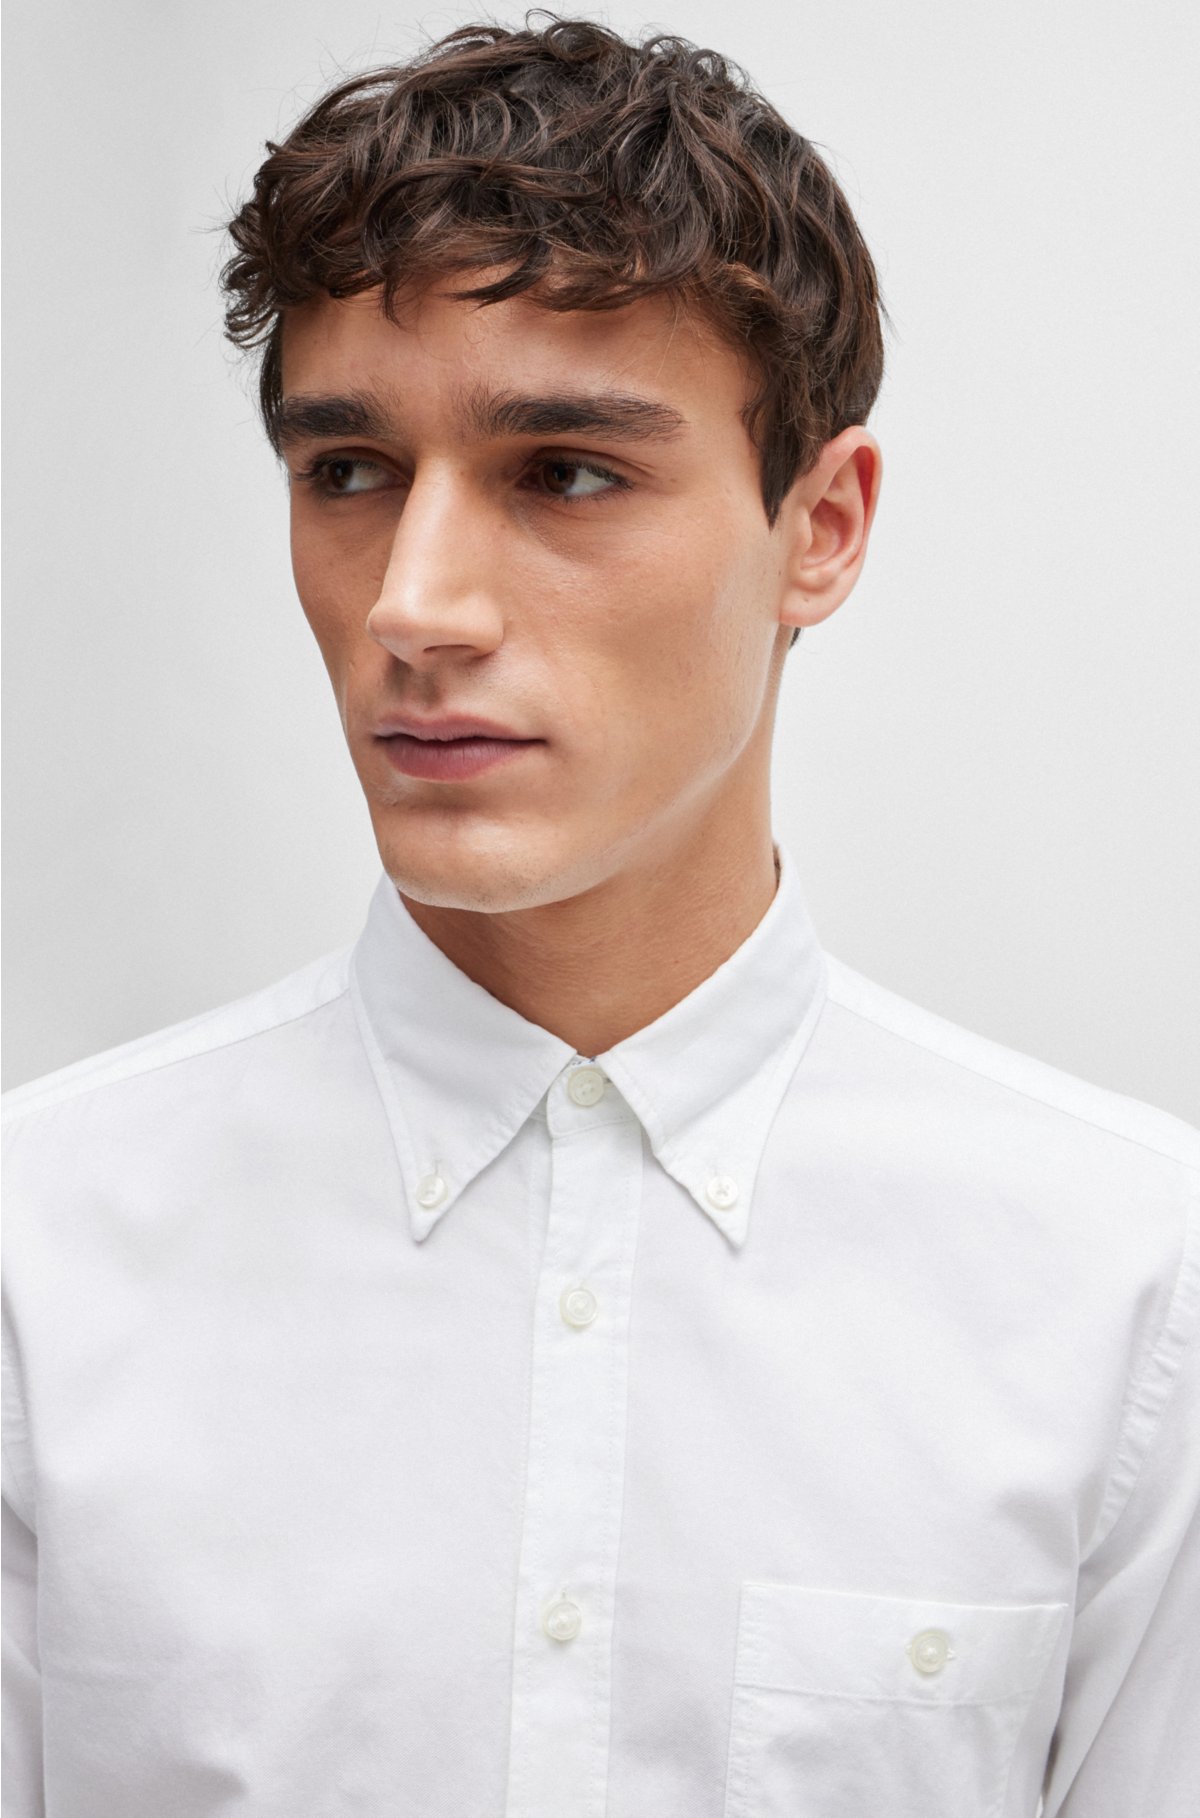 Slim-fit shirt in Oxford cotton with button-down collar, White